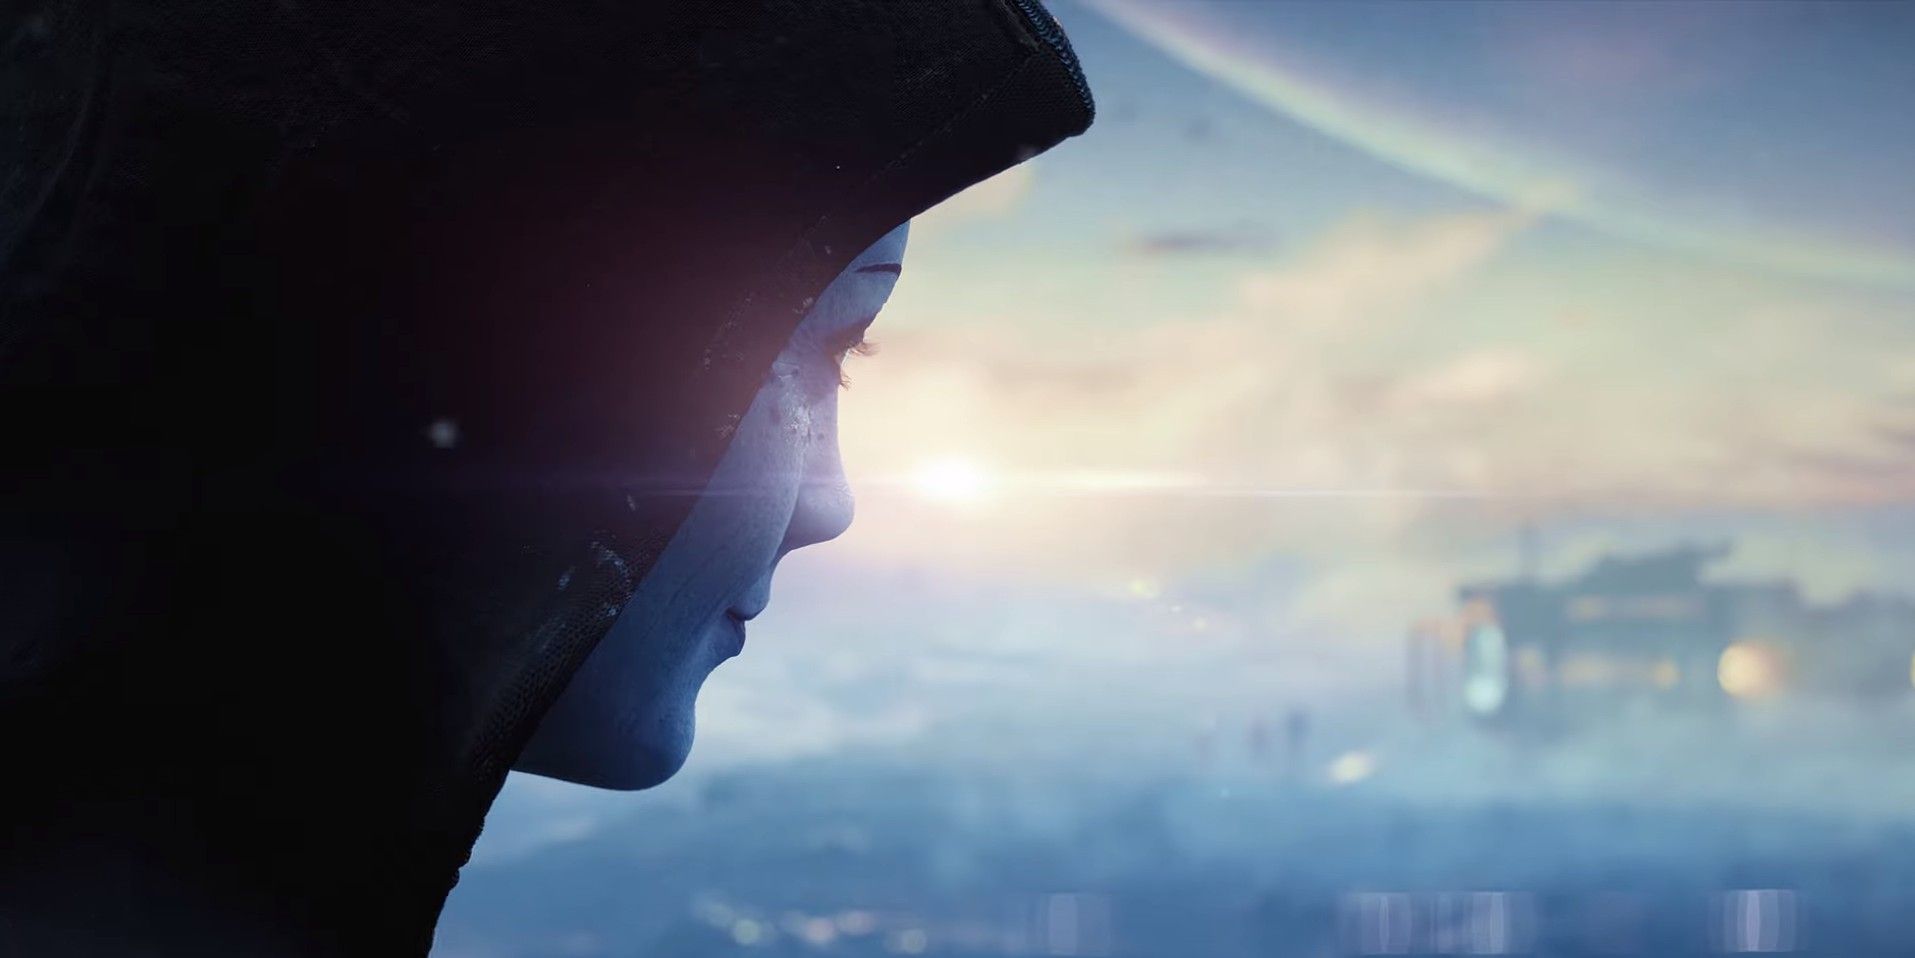 An image of Liara T'soni in a hood from a teaser trailer for Mass Effect 4